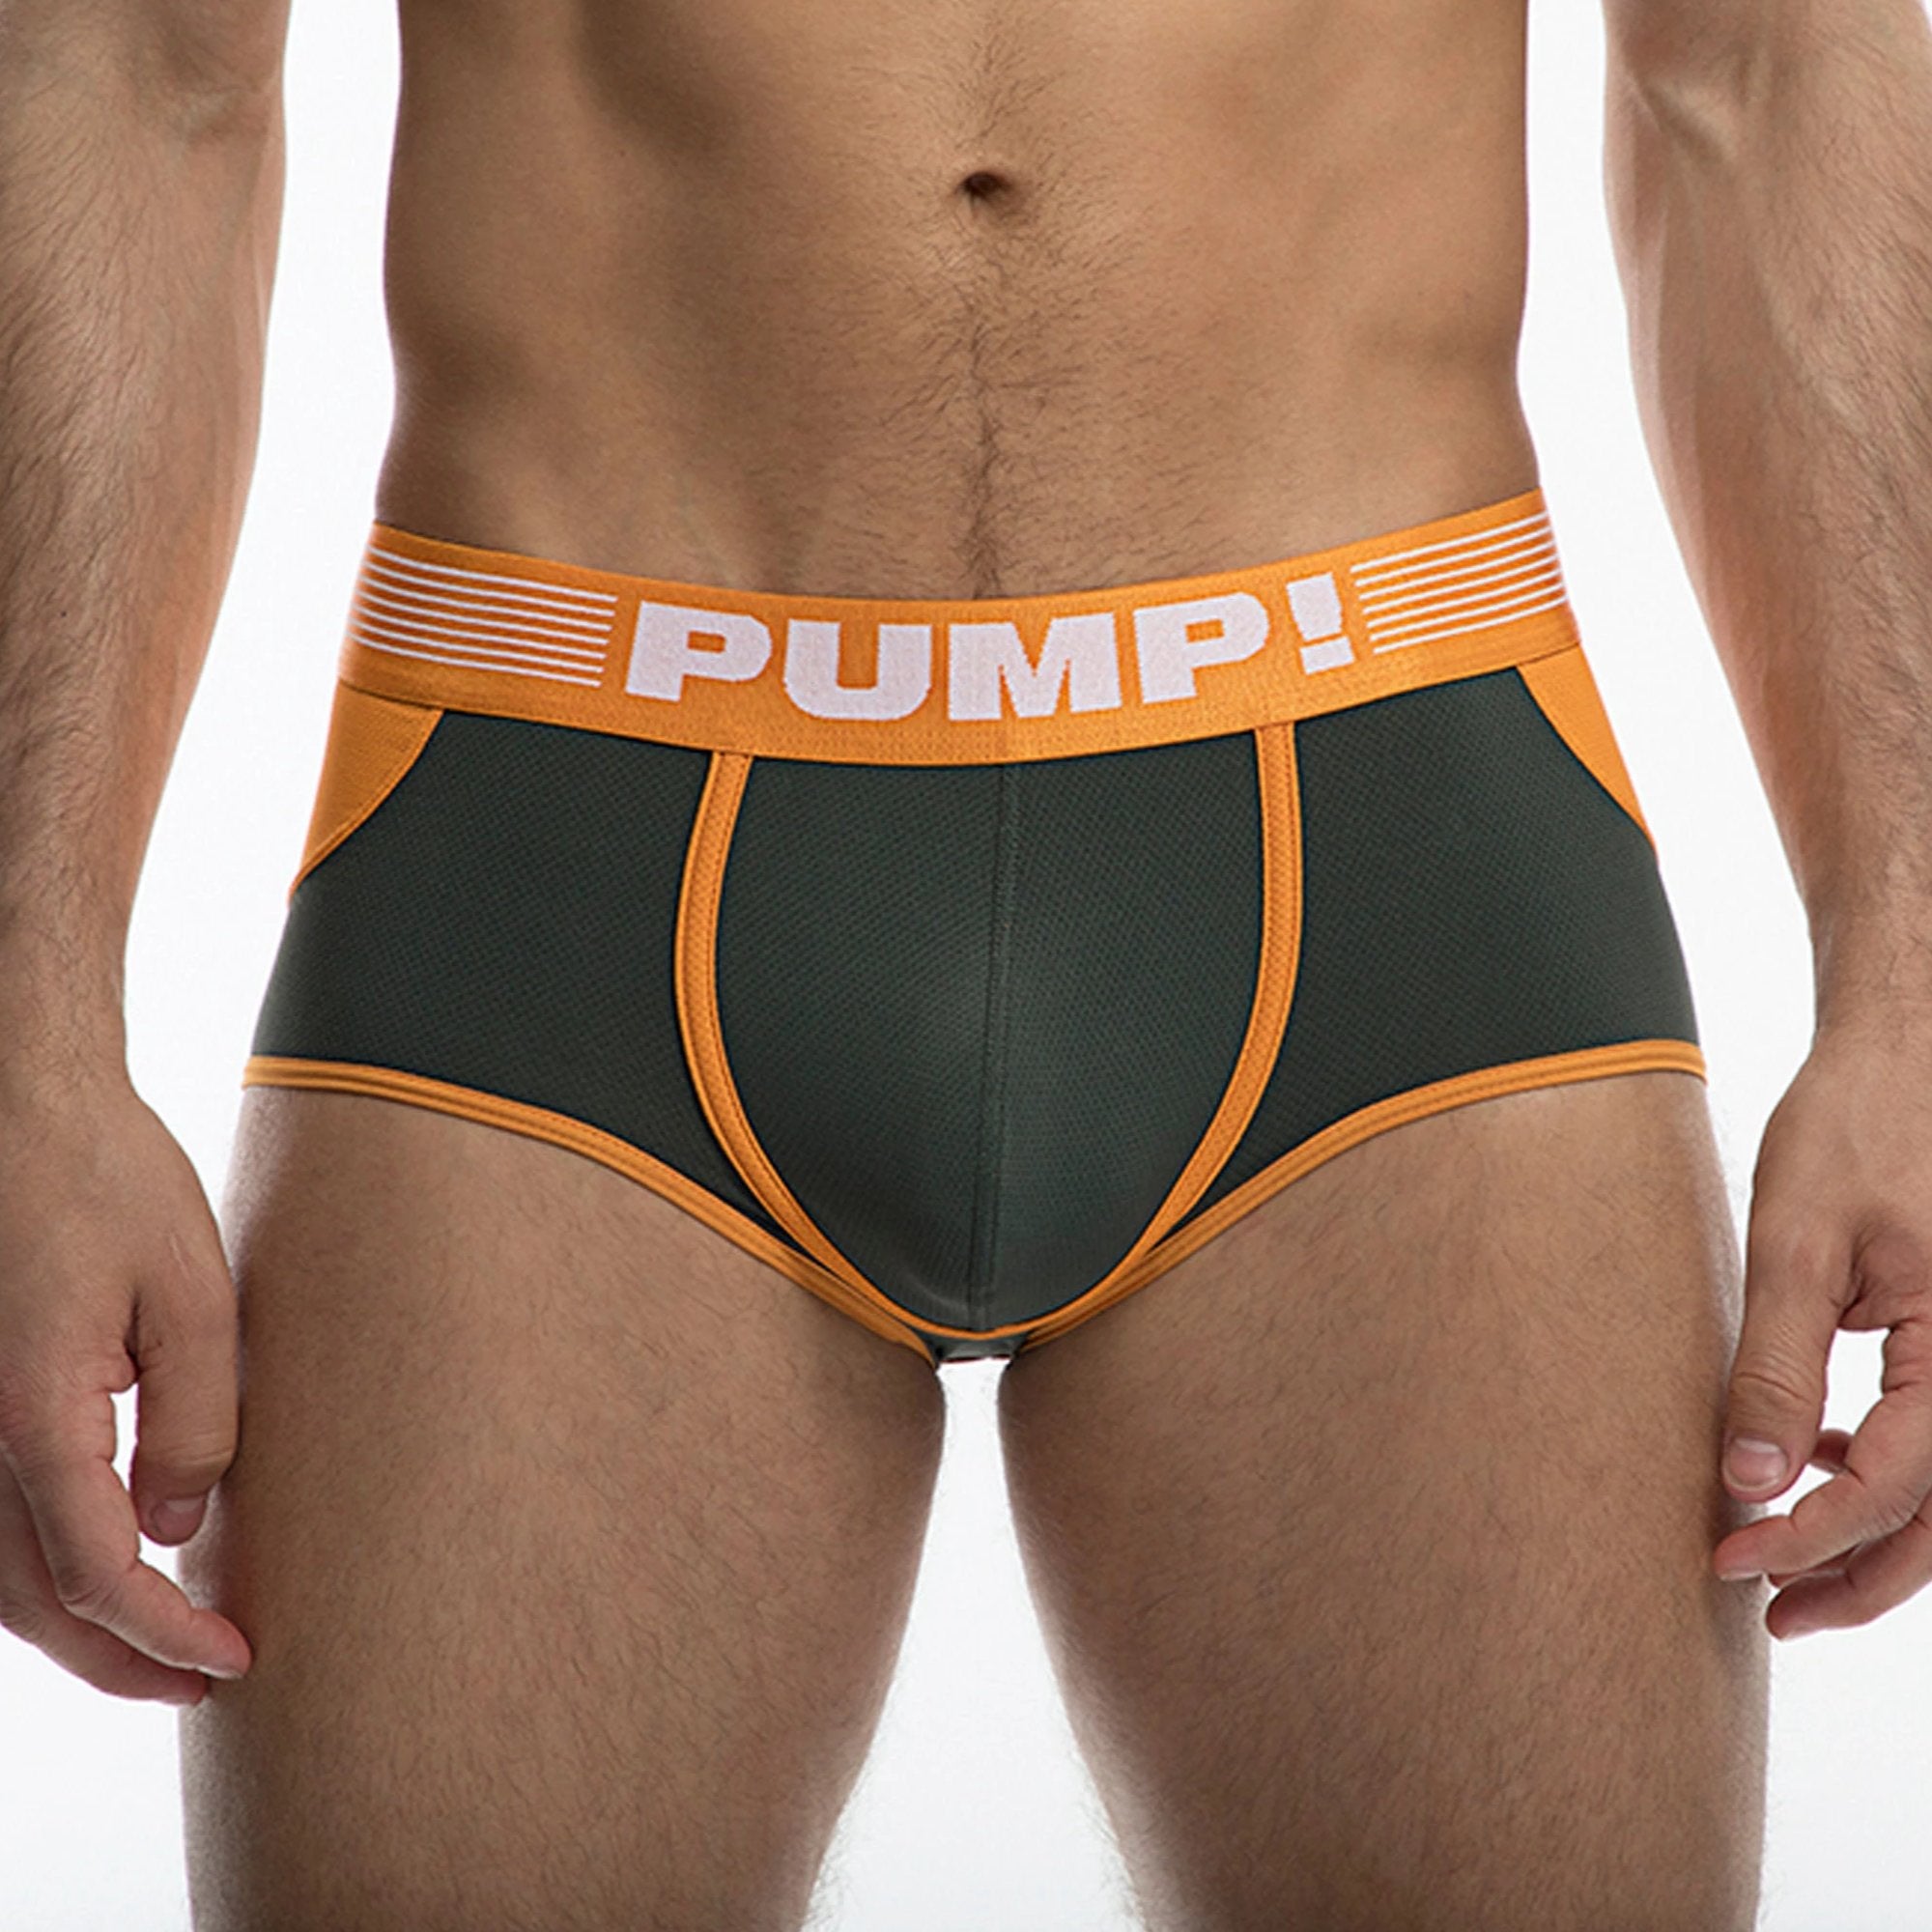 Squad Access Trunk Front by PUMP! Underwear at Trenderwear.com